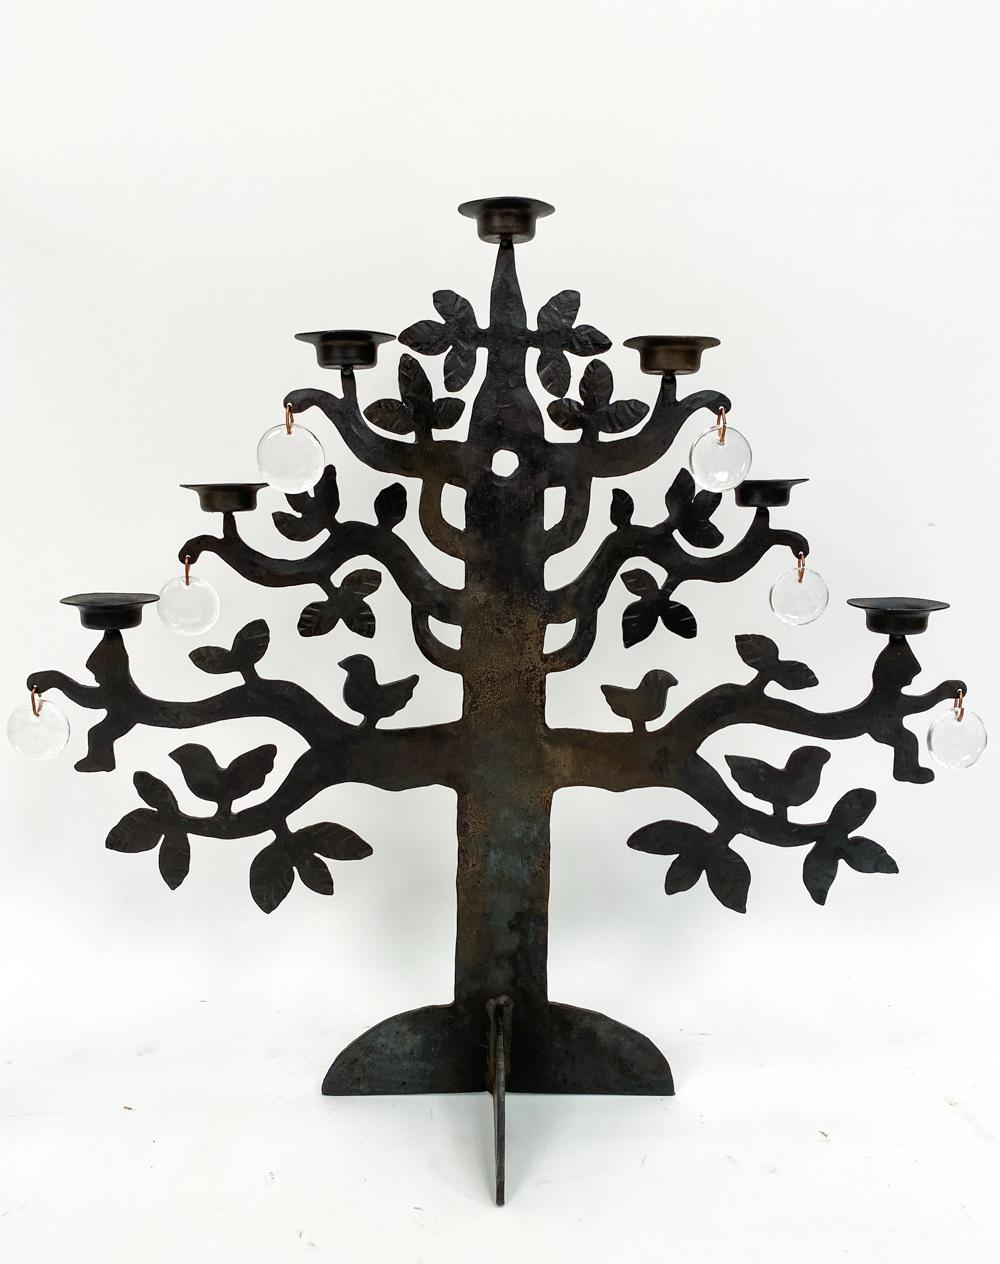 A rare and unusual Scandinavian modern 7-arm candelabra, designed by Bertil Vallien and produced by Kosta Boda. Deemed the 